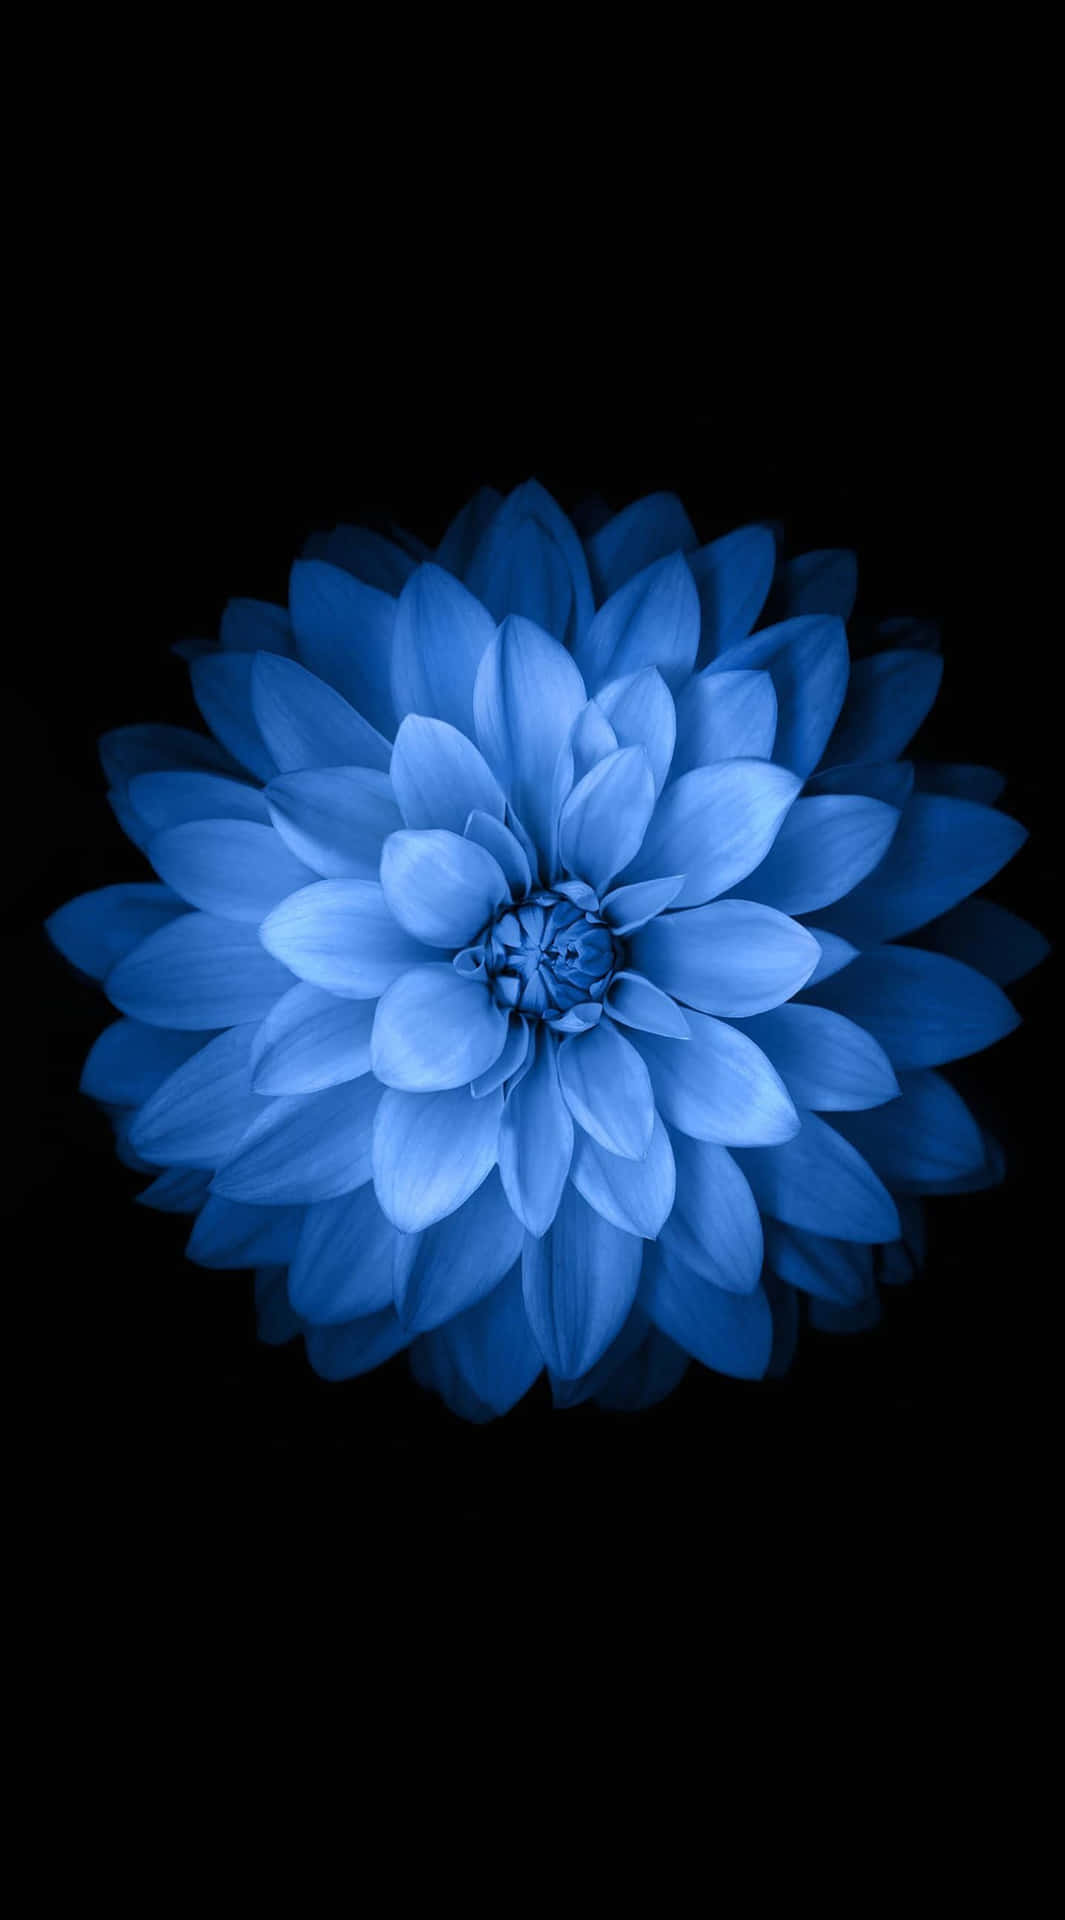 Standard Blue Flower For Iphone 6 Background